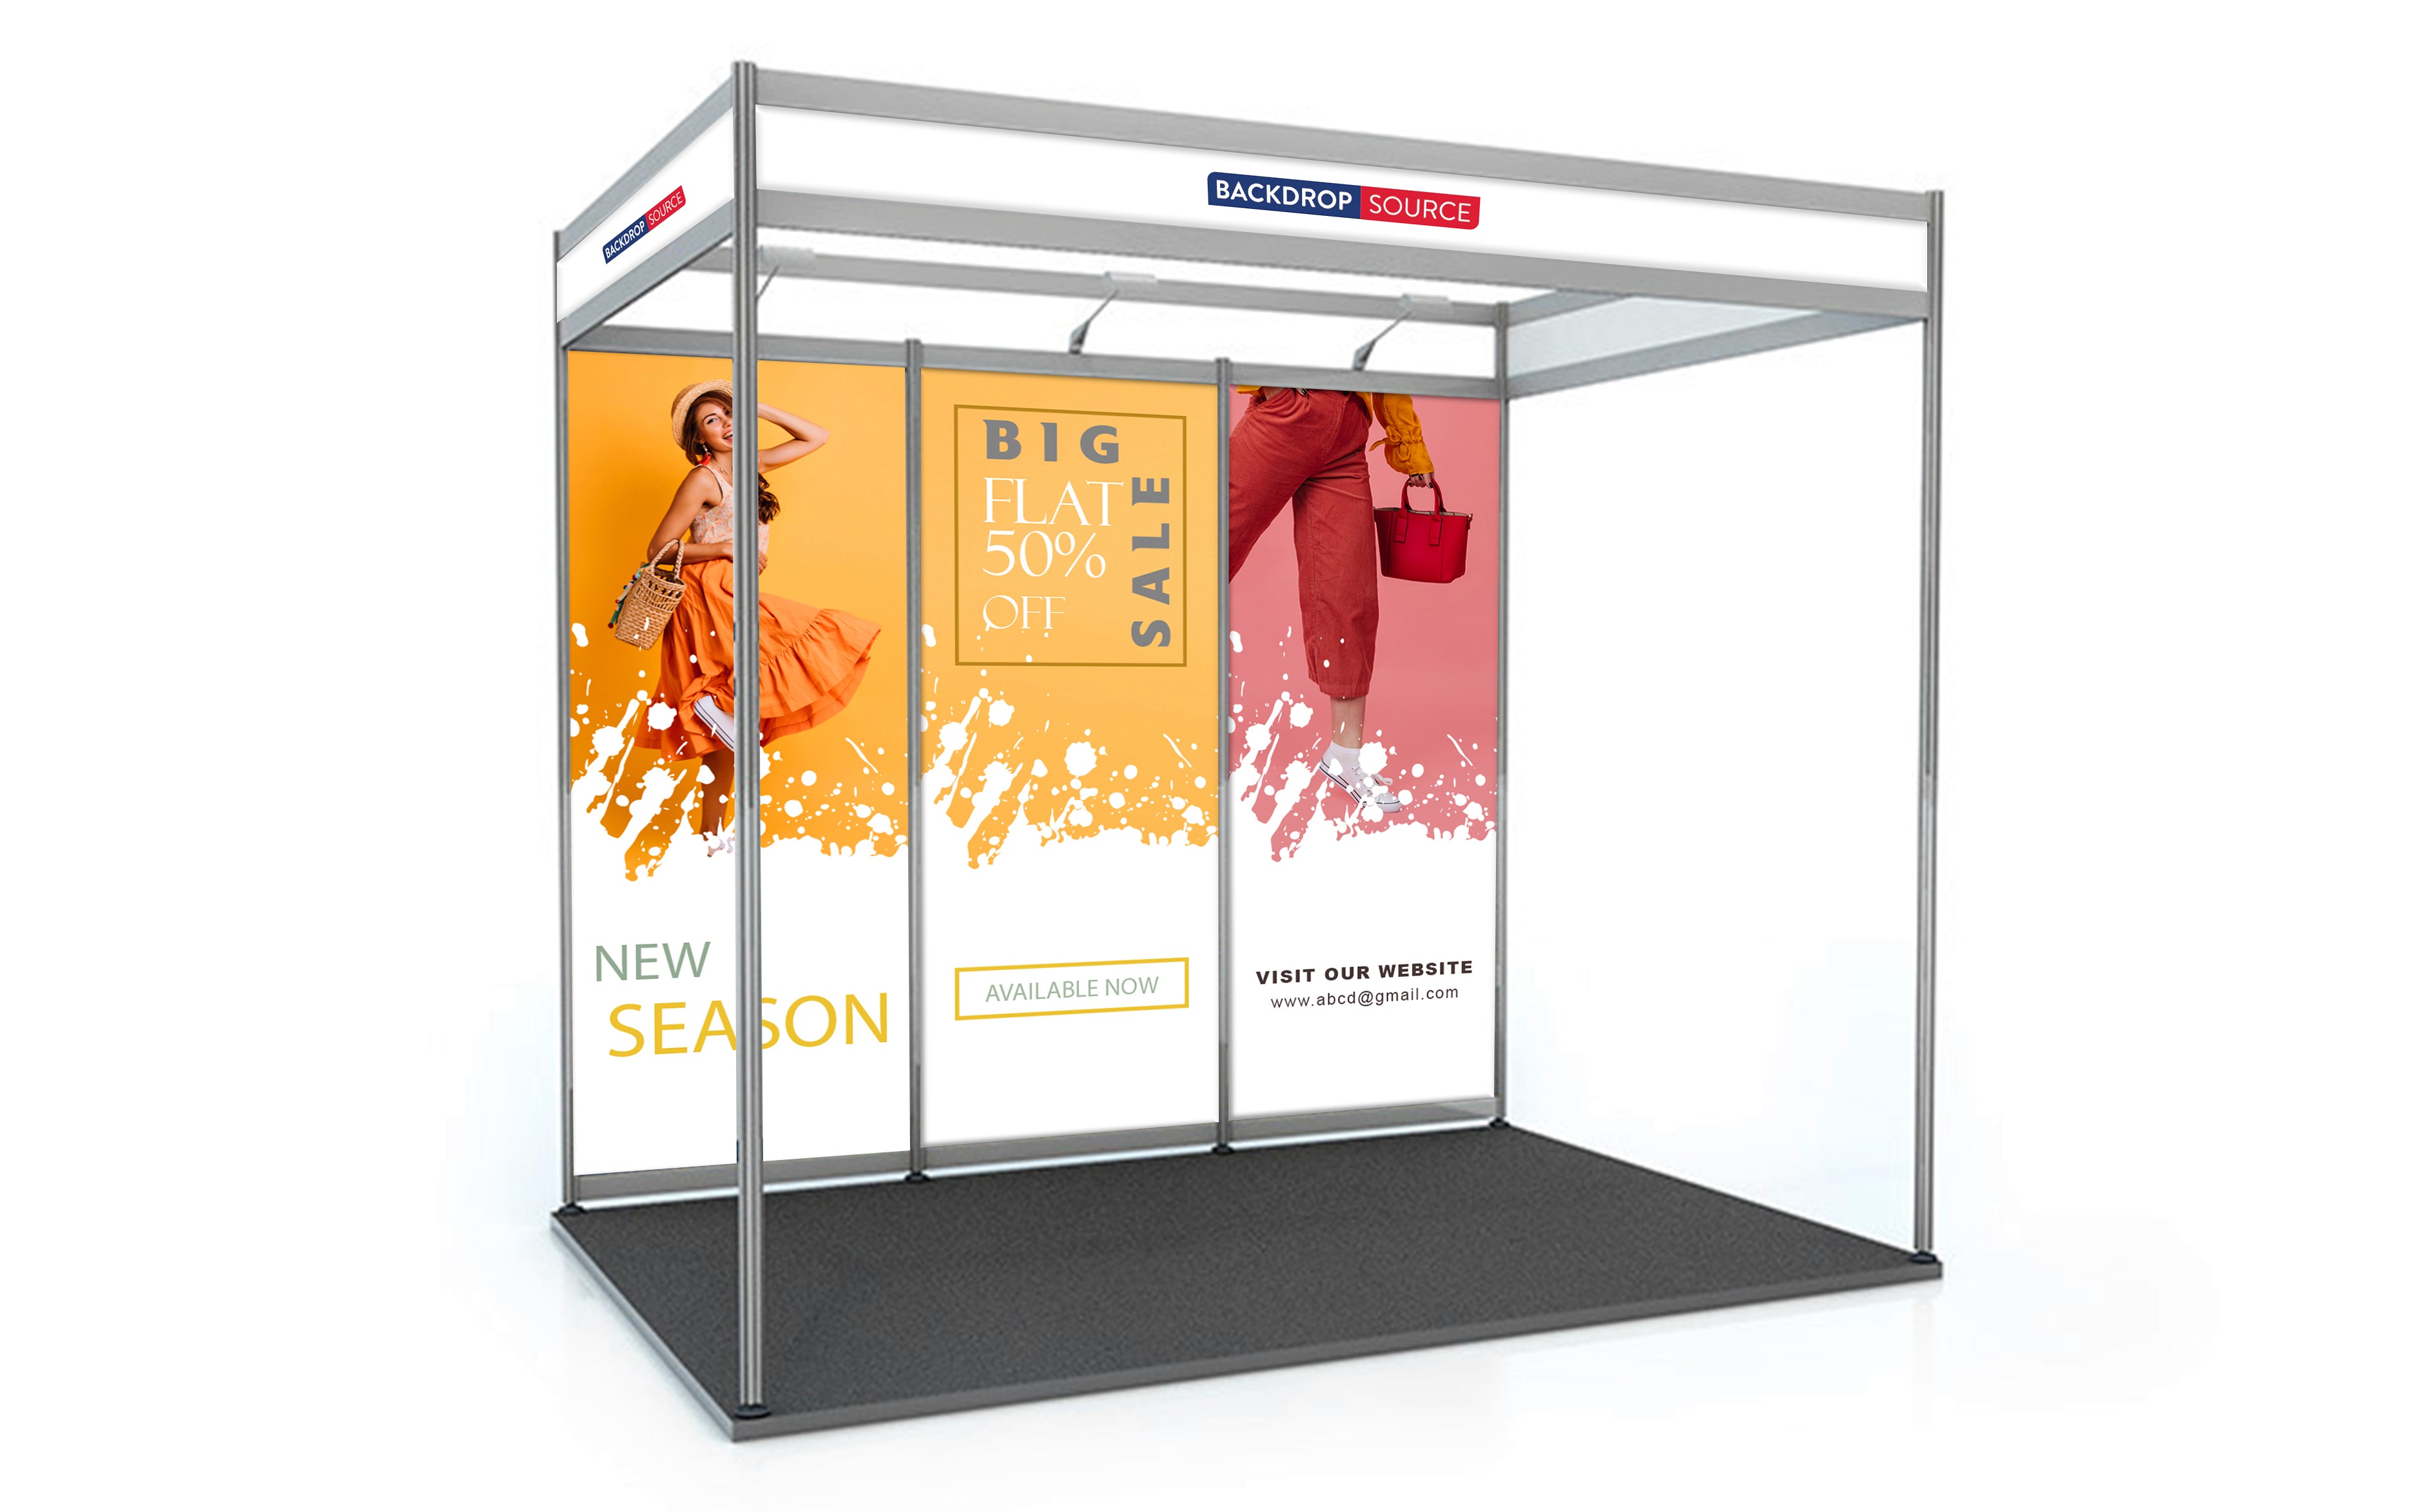 Shell Scheme Exhibition Graphics for 10ft Wide x 6.5ft Depth Booth